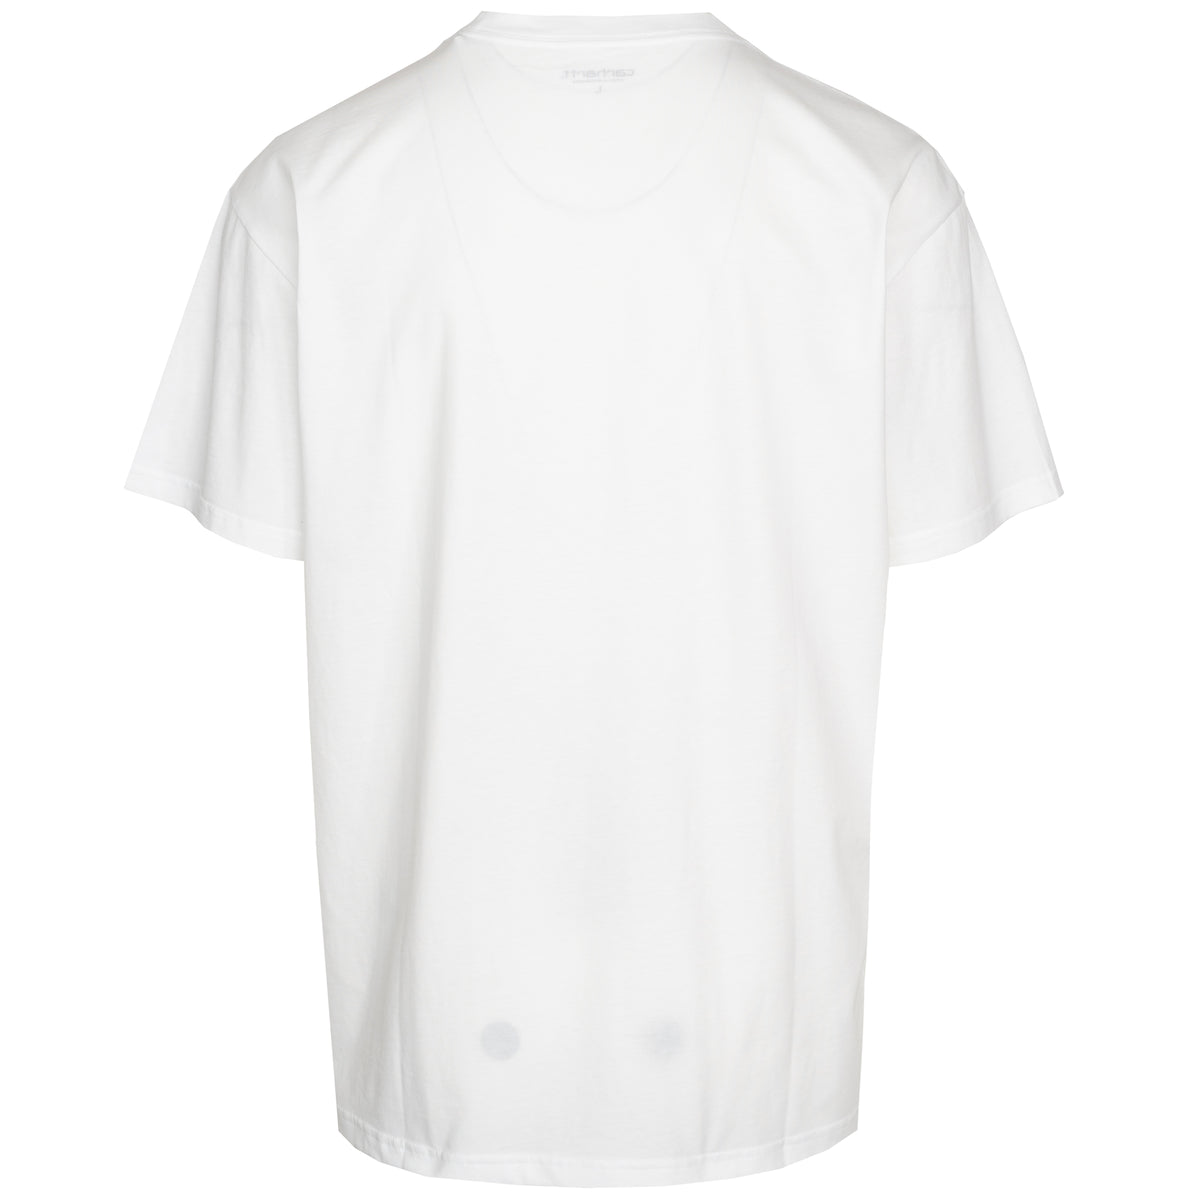 Load image into Gallery viewer, Carhartt WIP White Pocket Heart Tee
